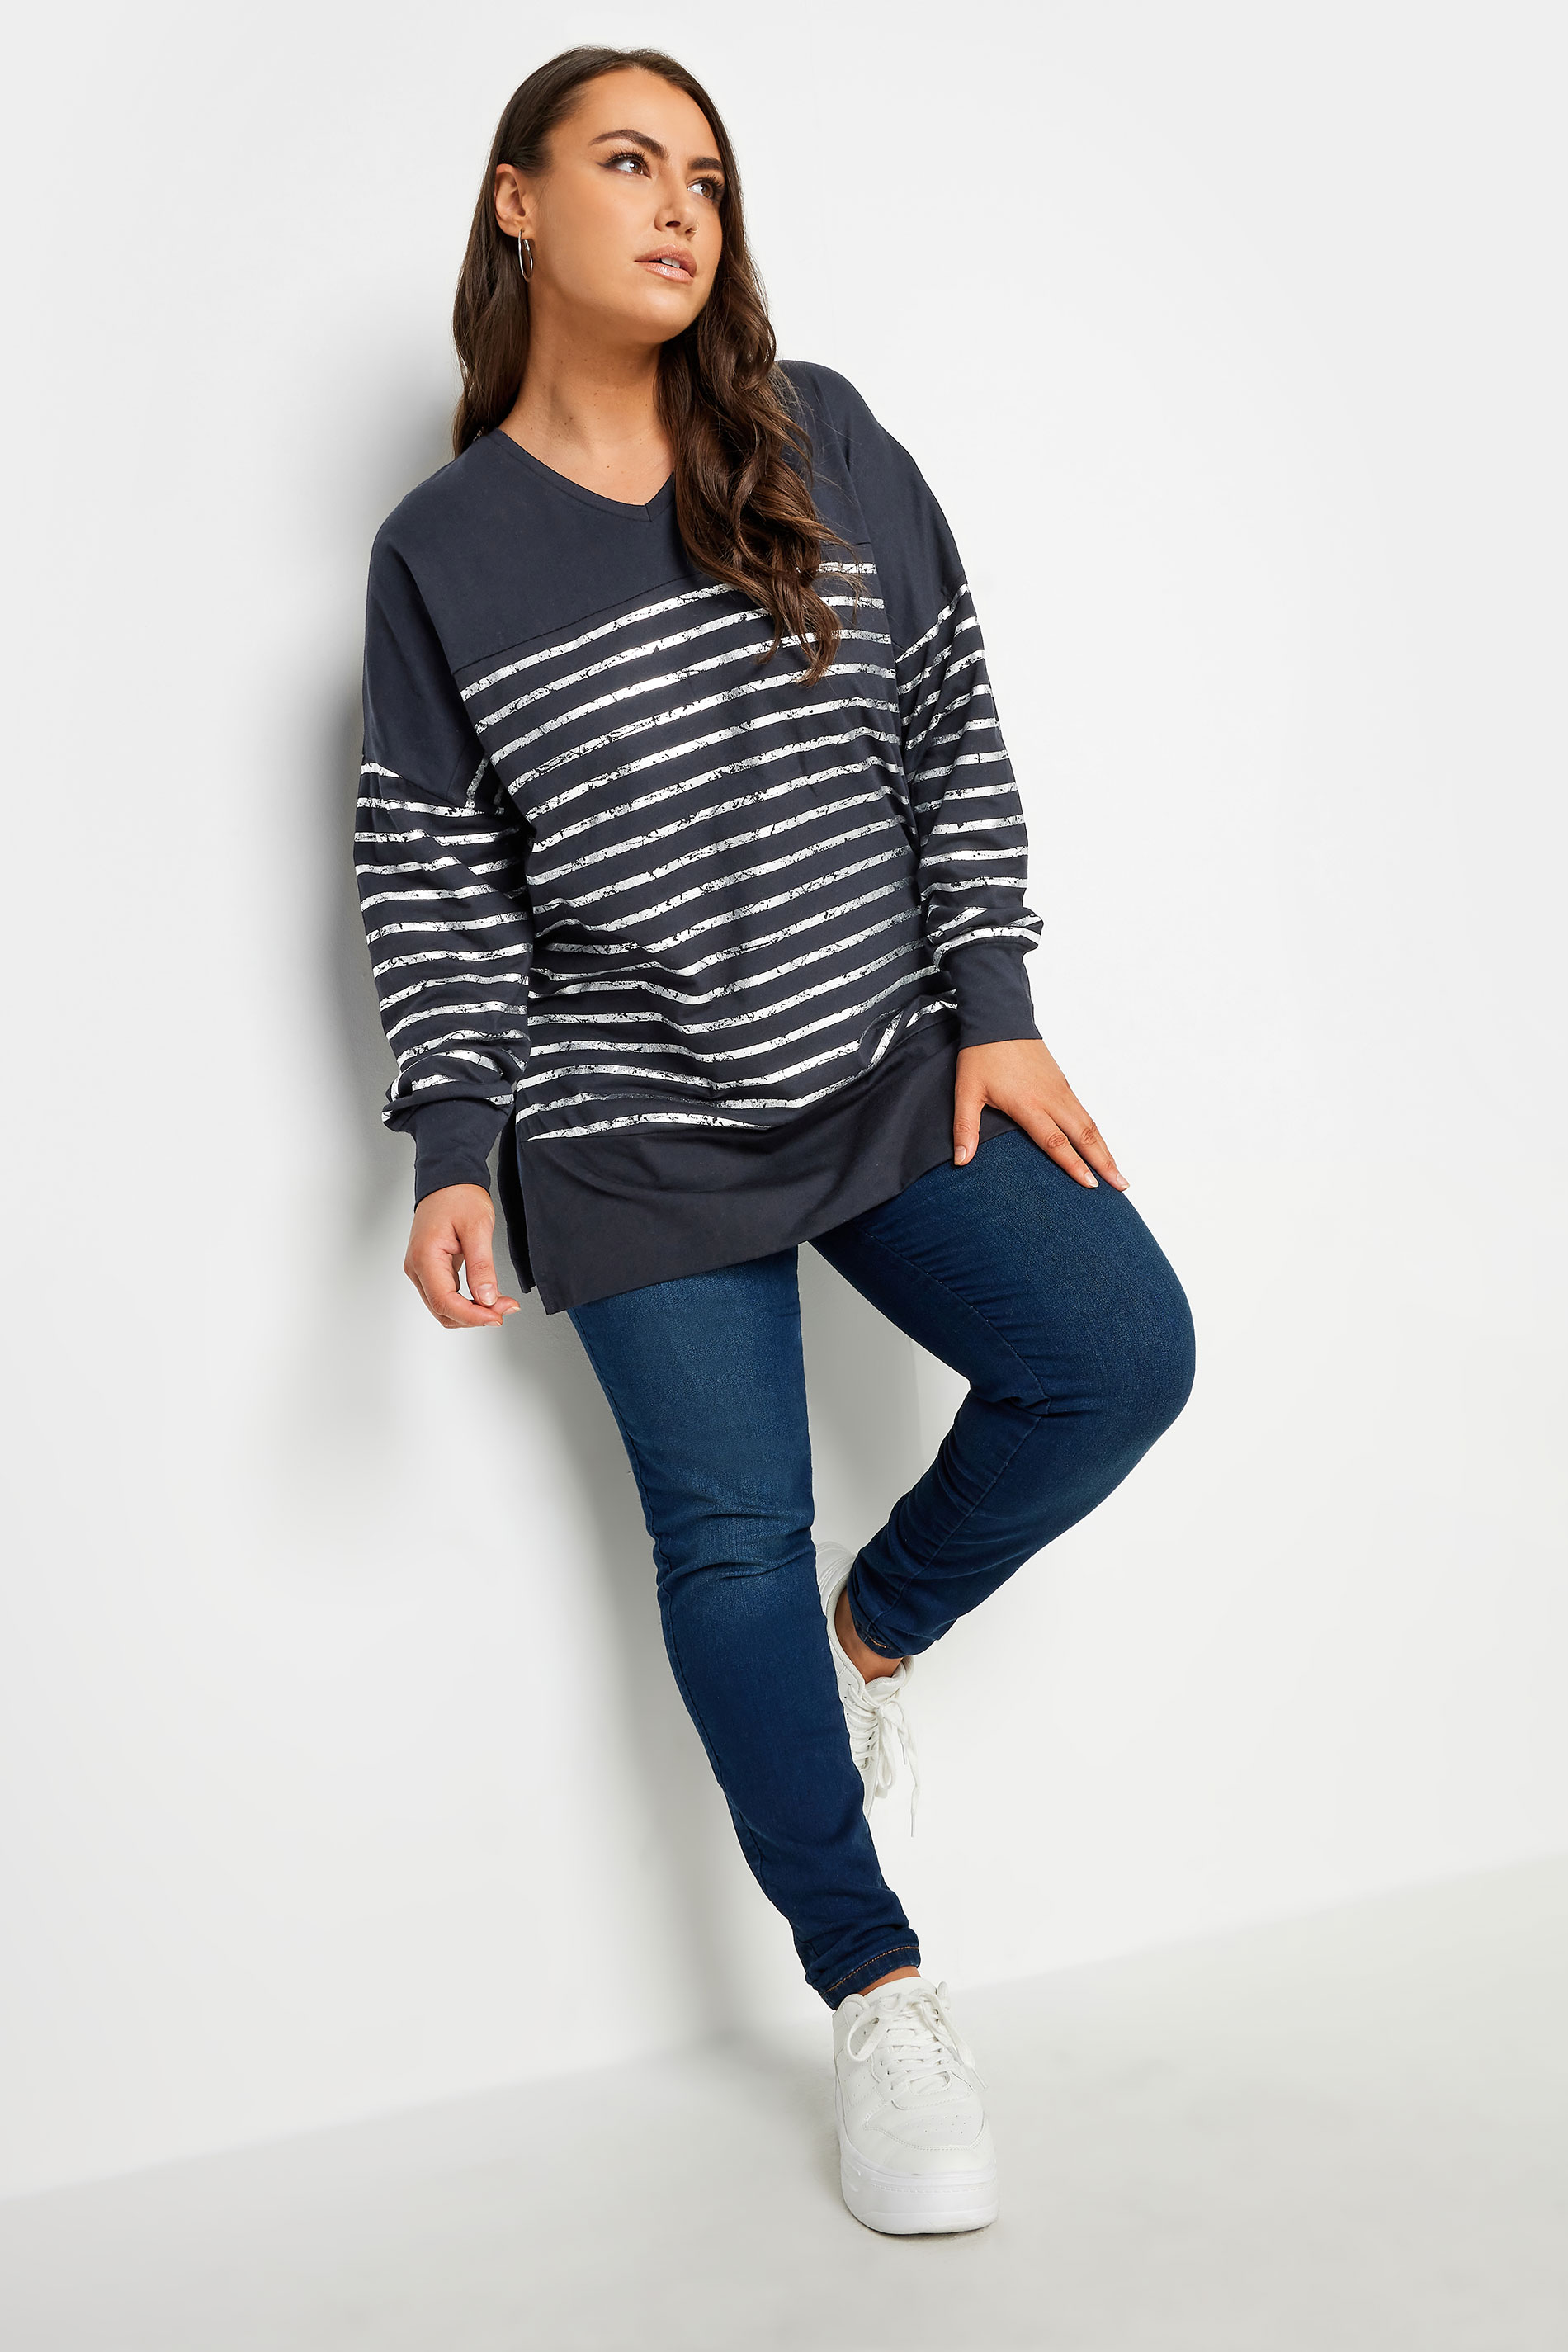 YOURS LUXURY Plus Size Navy Blue Metallic Stripe Top | Yours Clothing 2